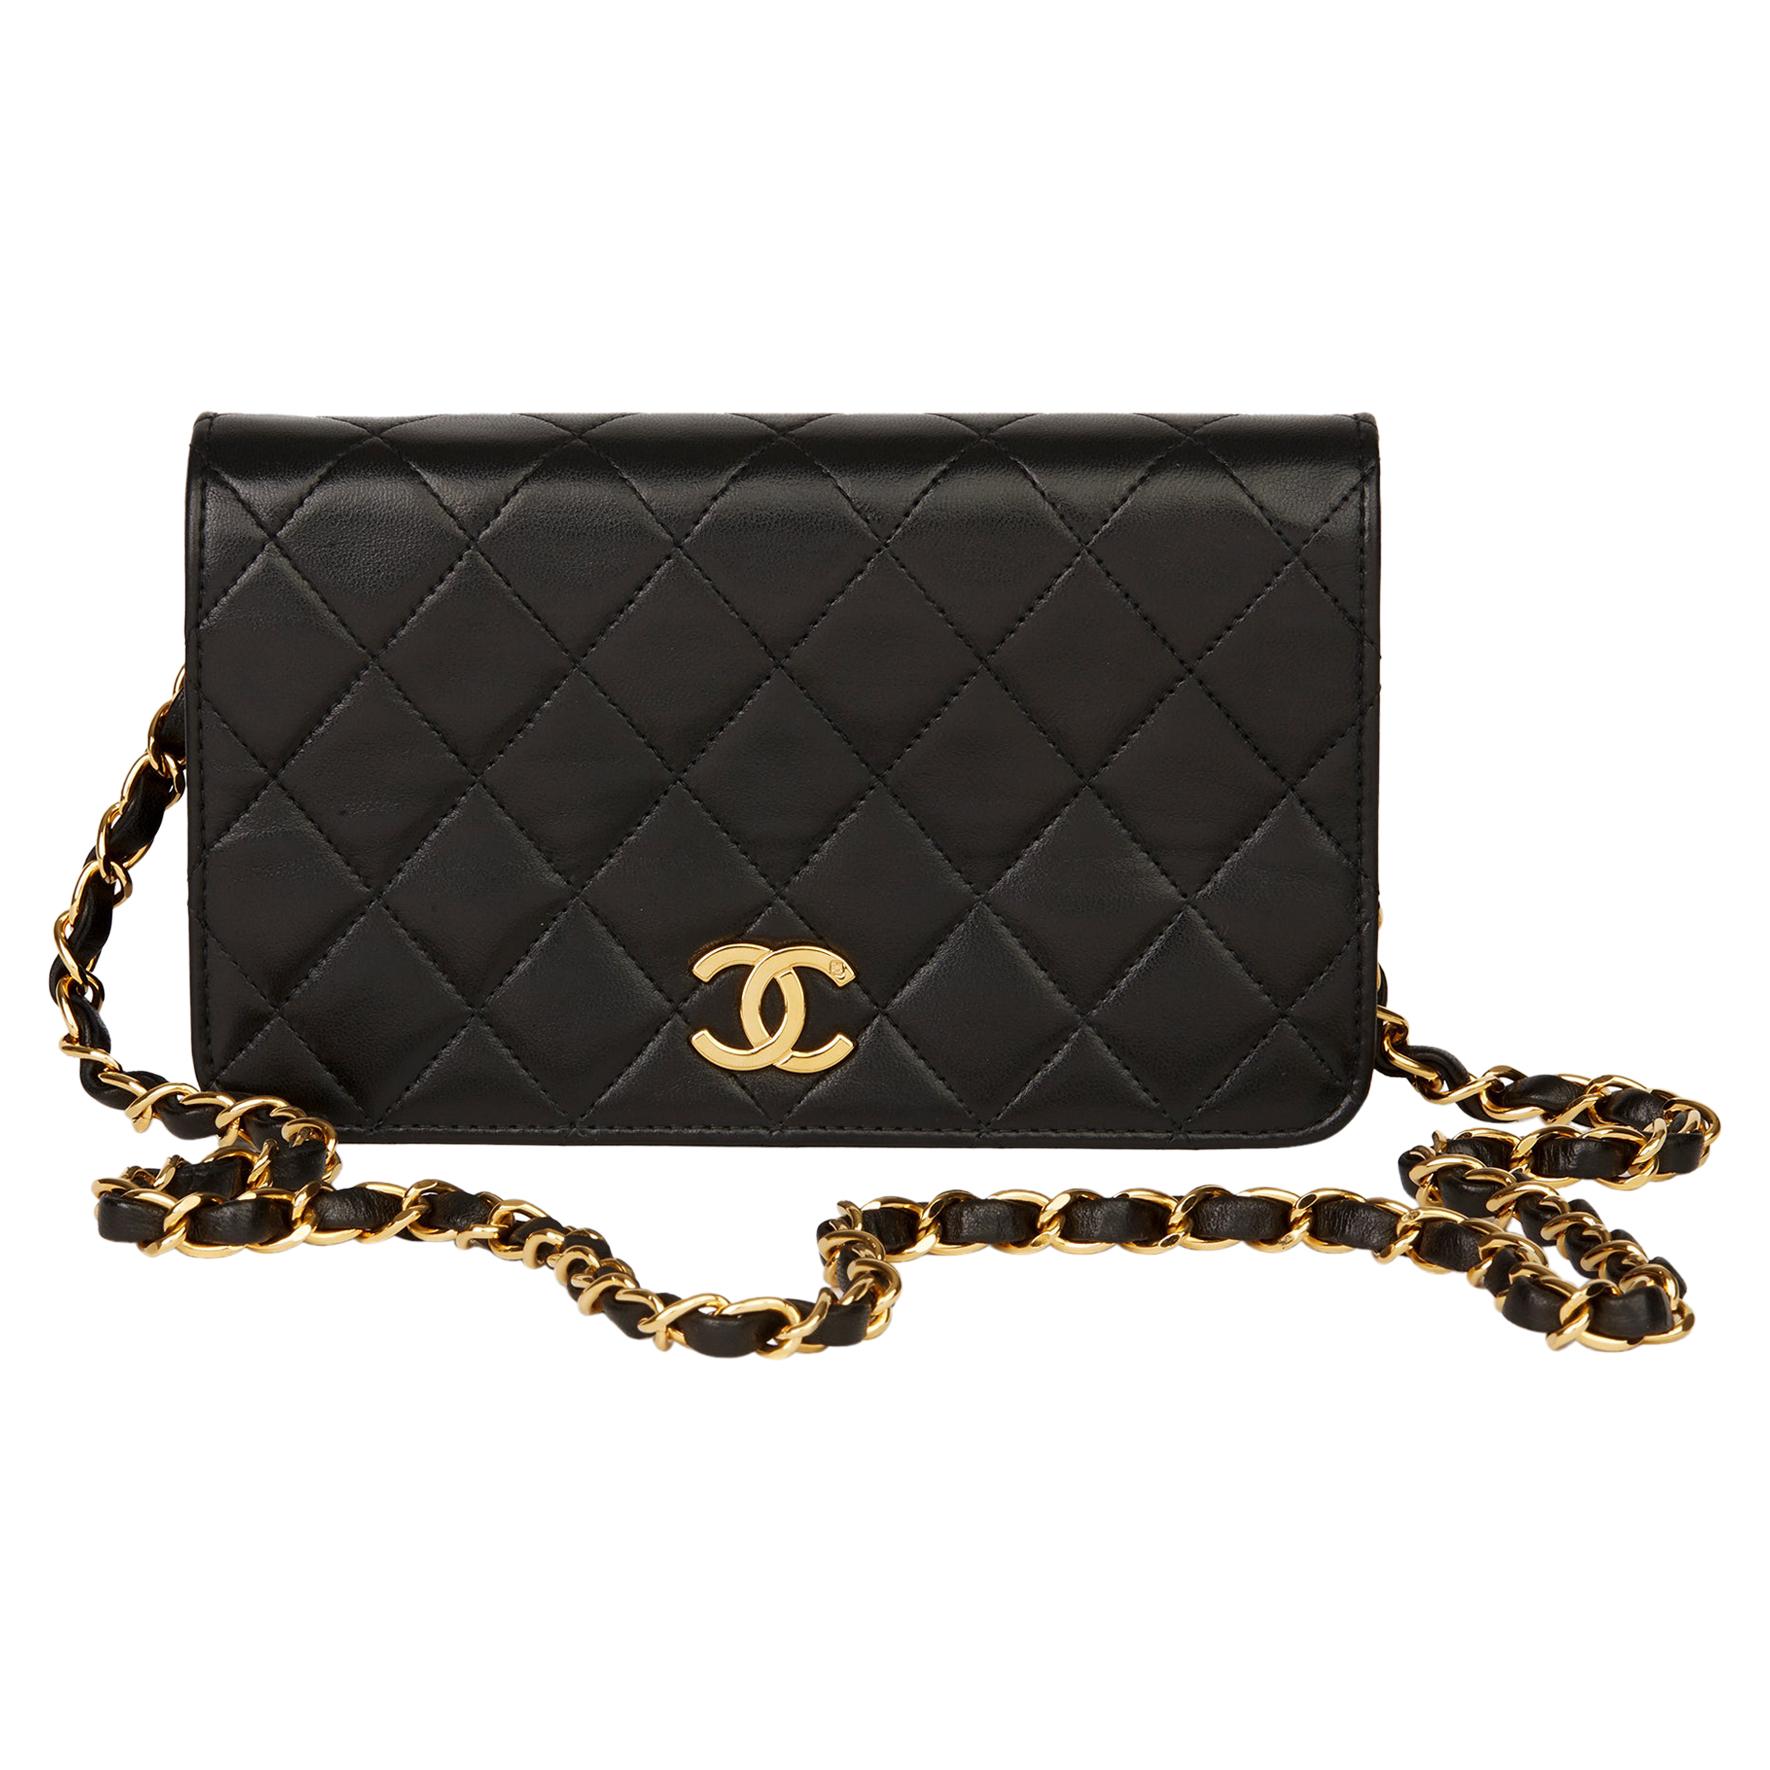 1994 Chanel Black Quilted Lambskin Vintage Mini Flap Bag